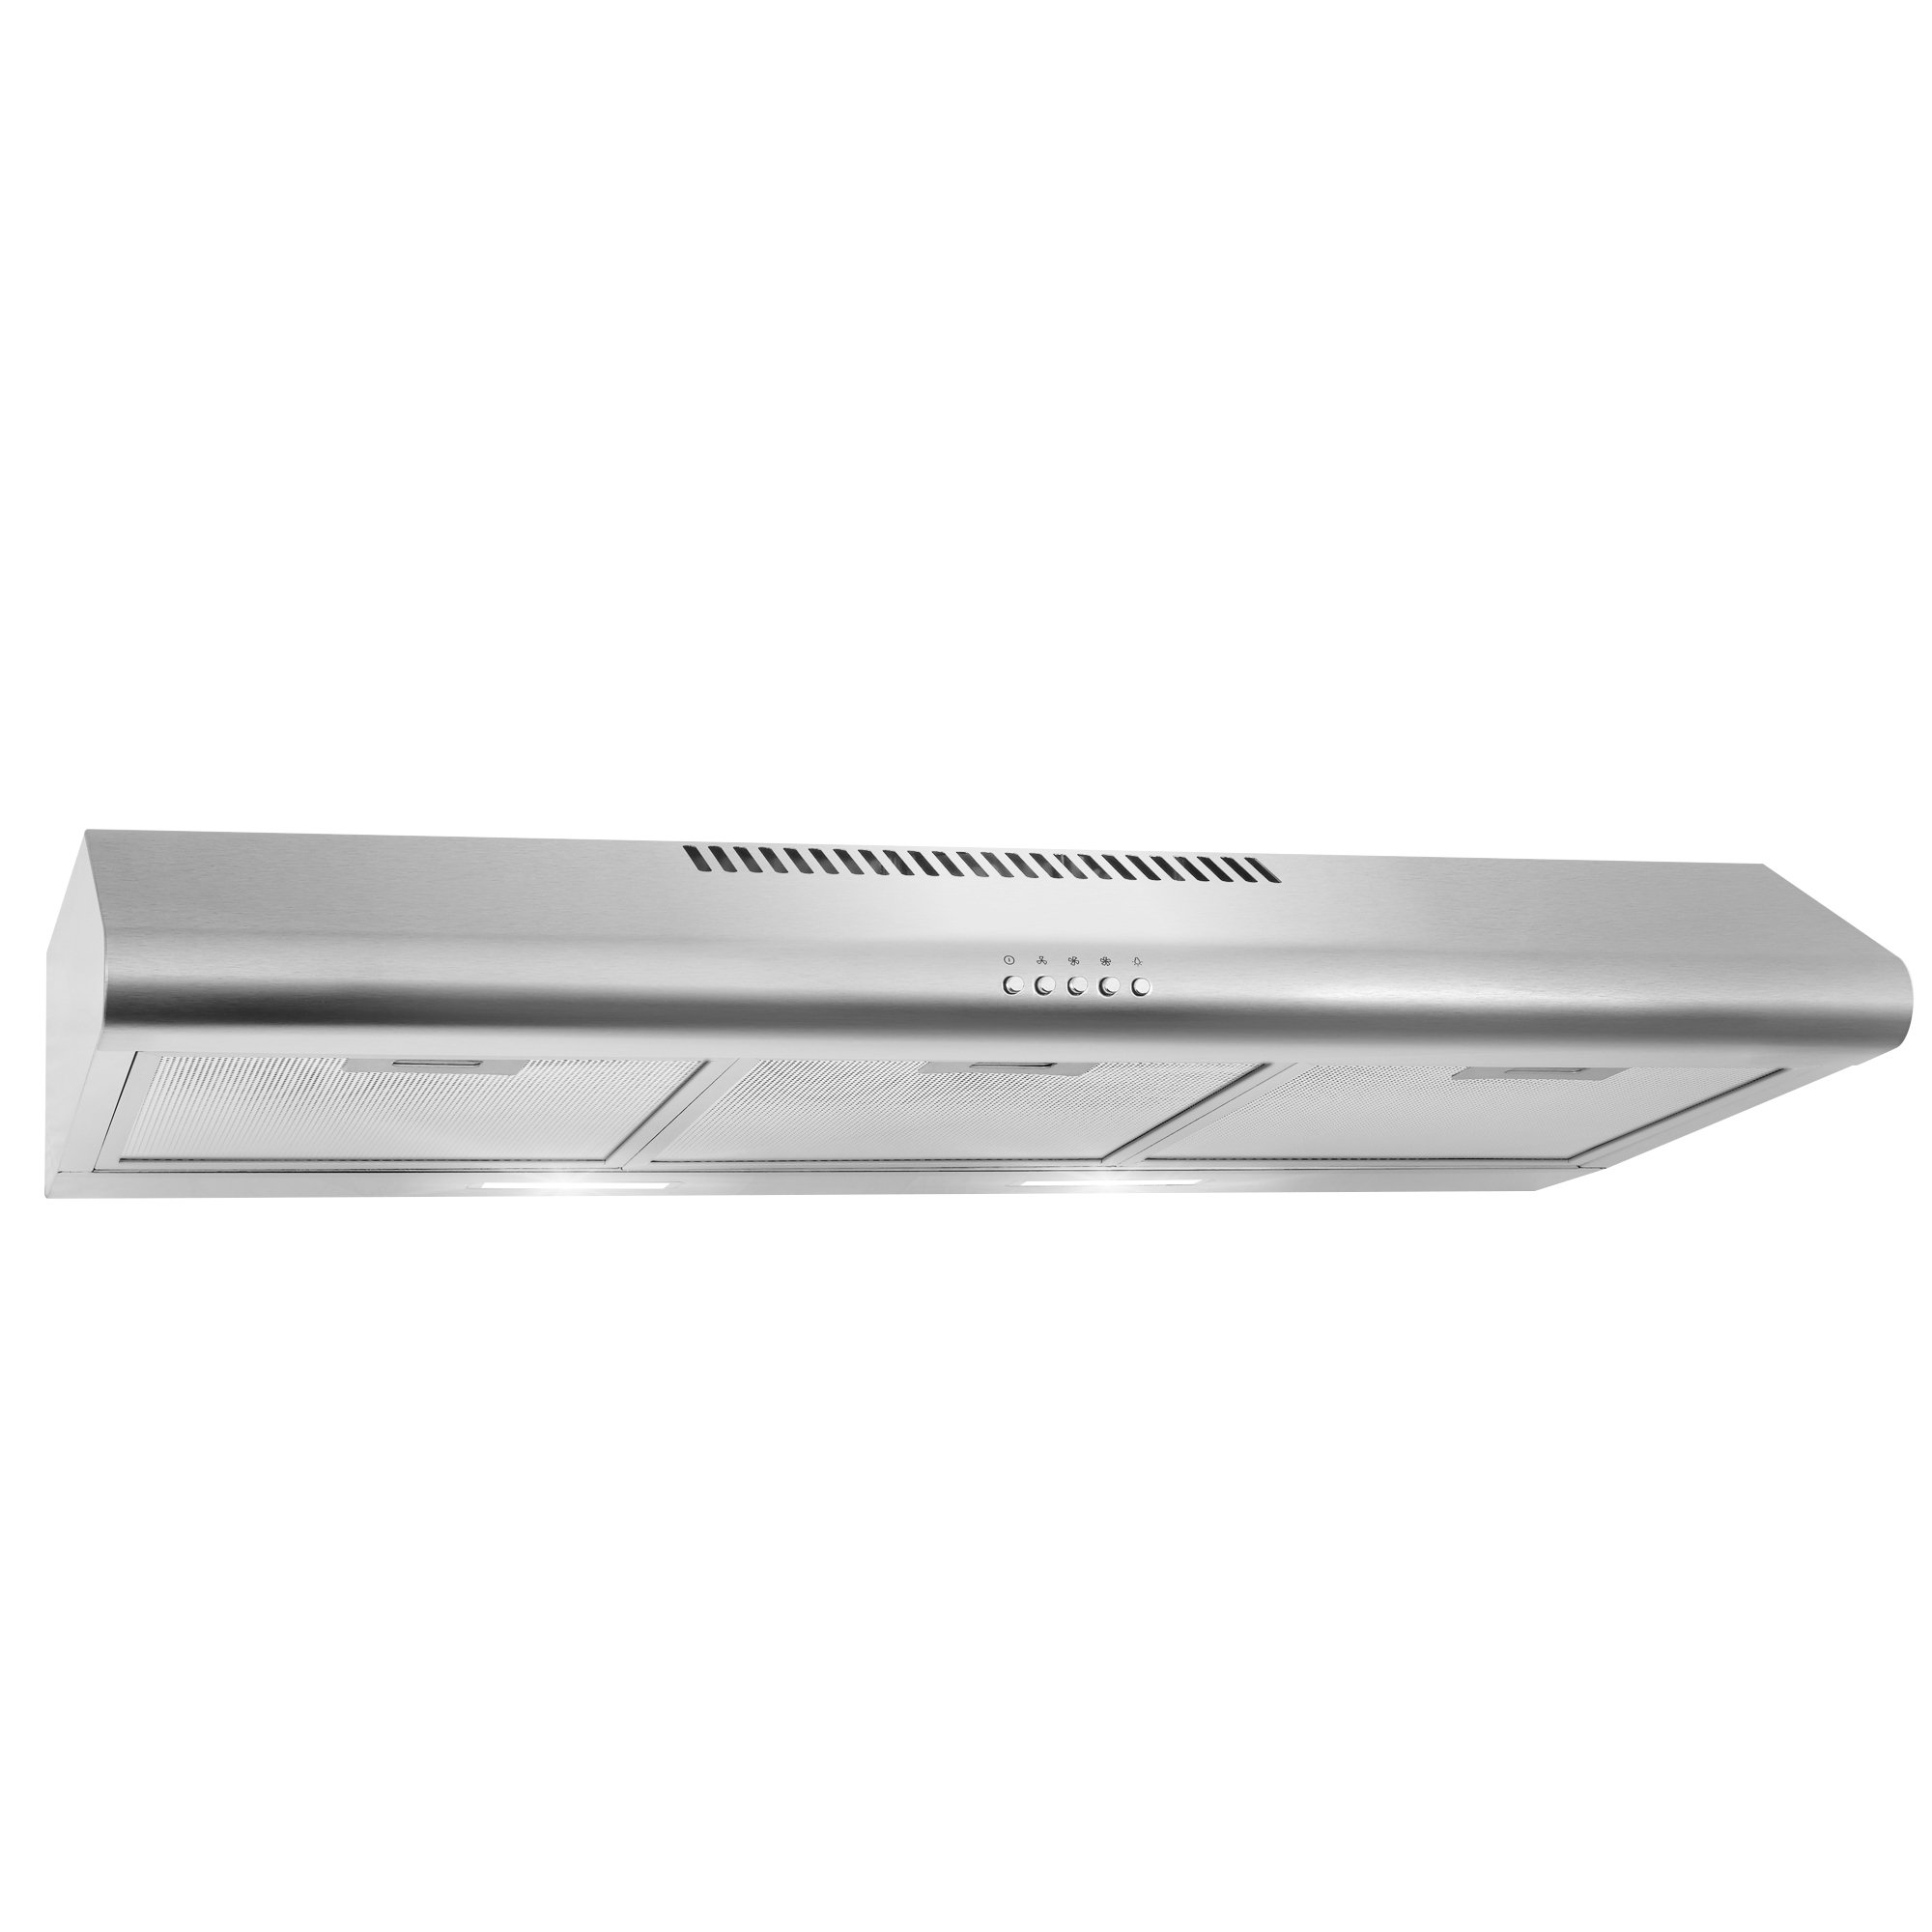 Cosmo COS-5MU36 Ducted Under Cabinet Range Hood 200 CFM - Stainless Steel  for sale online